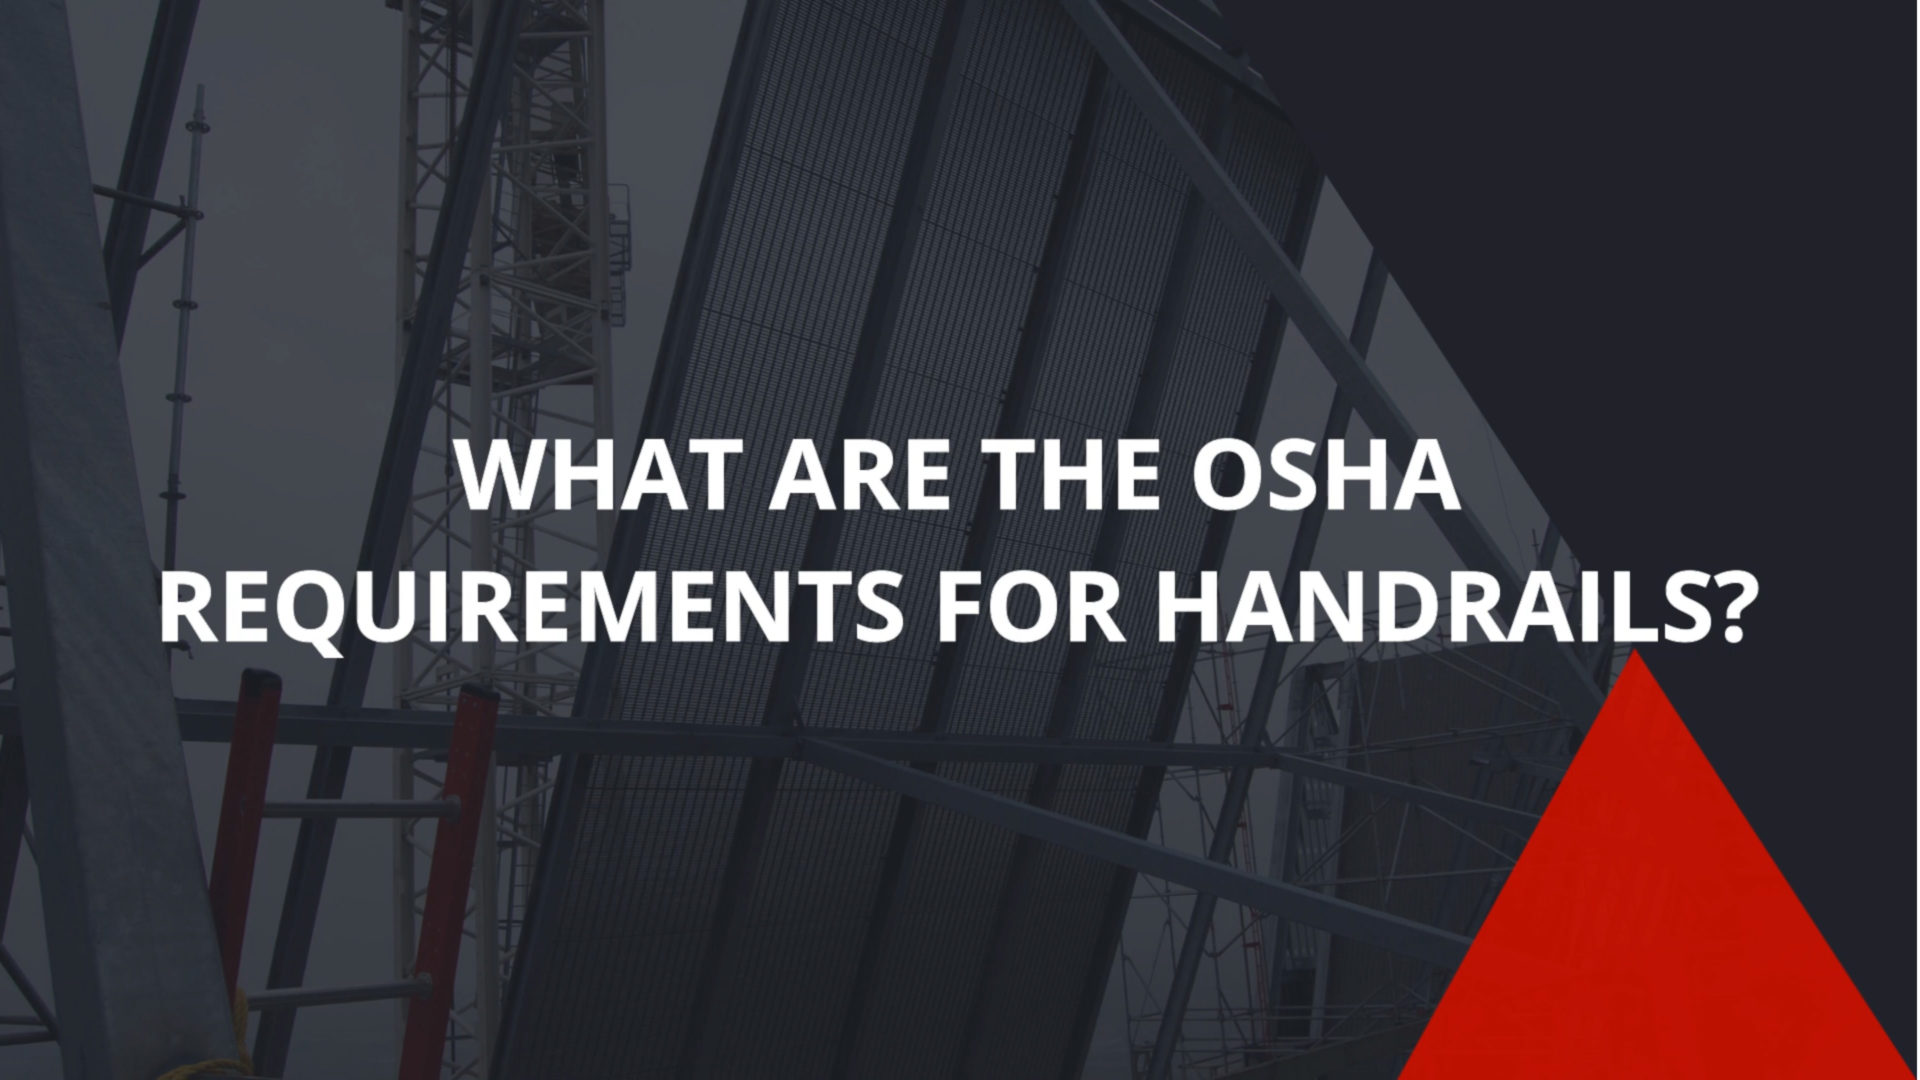 What Are The OSHA Requirements For Handrails?